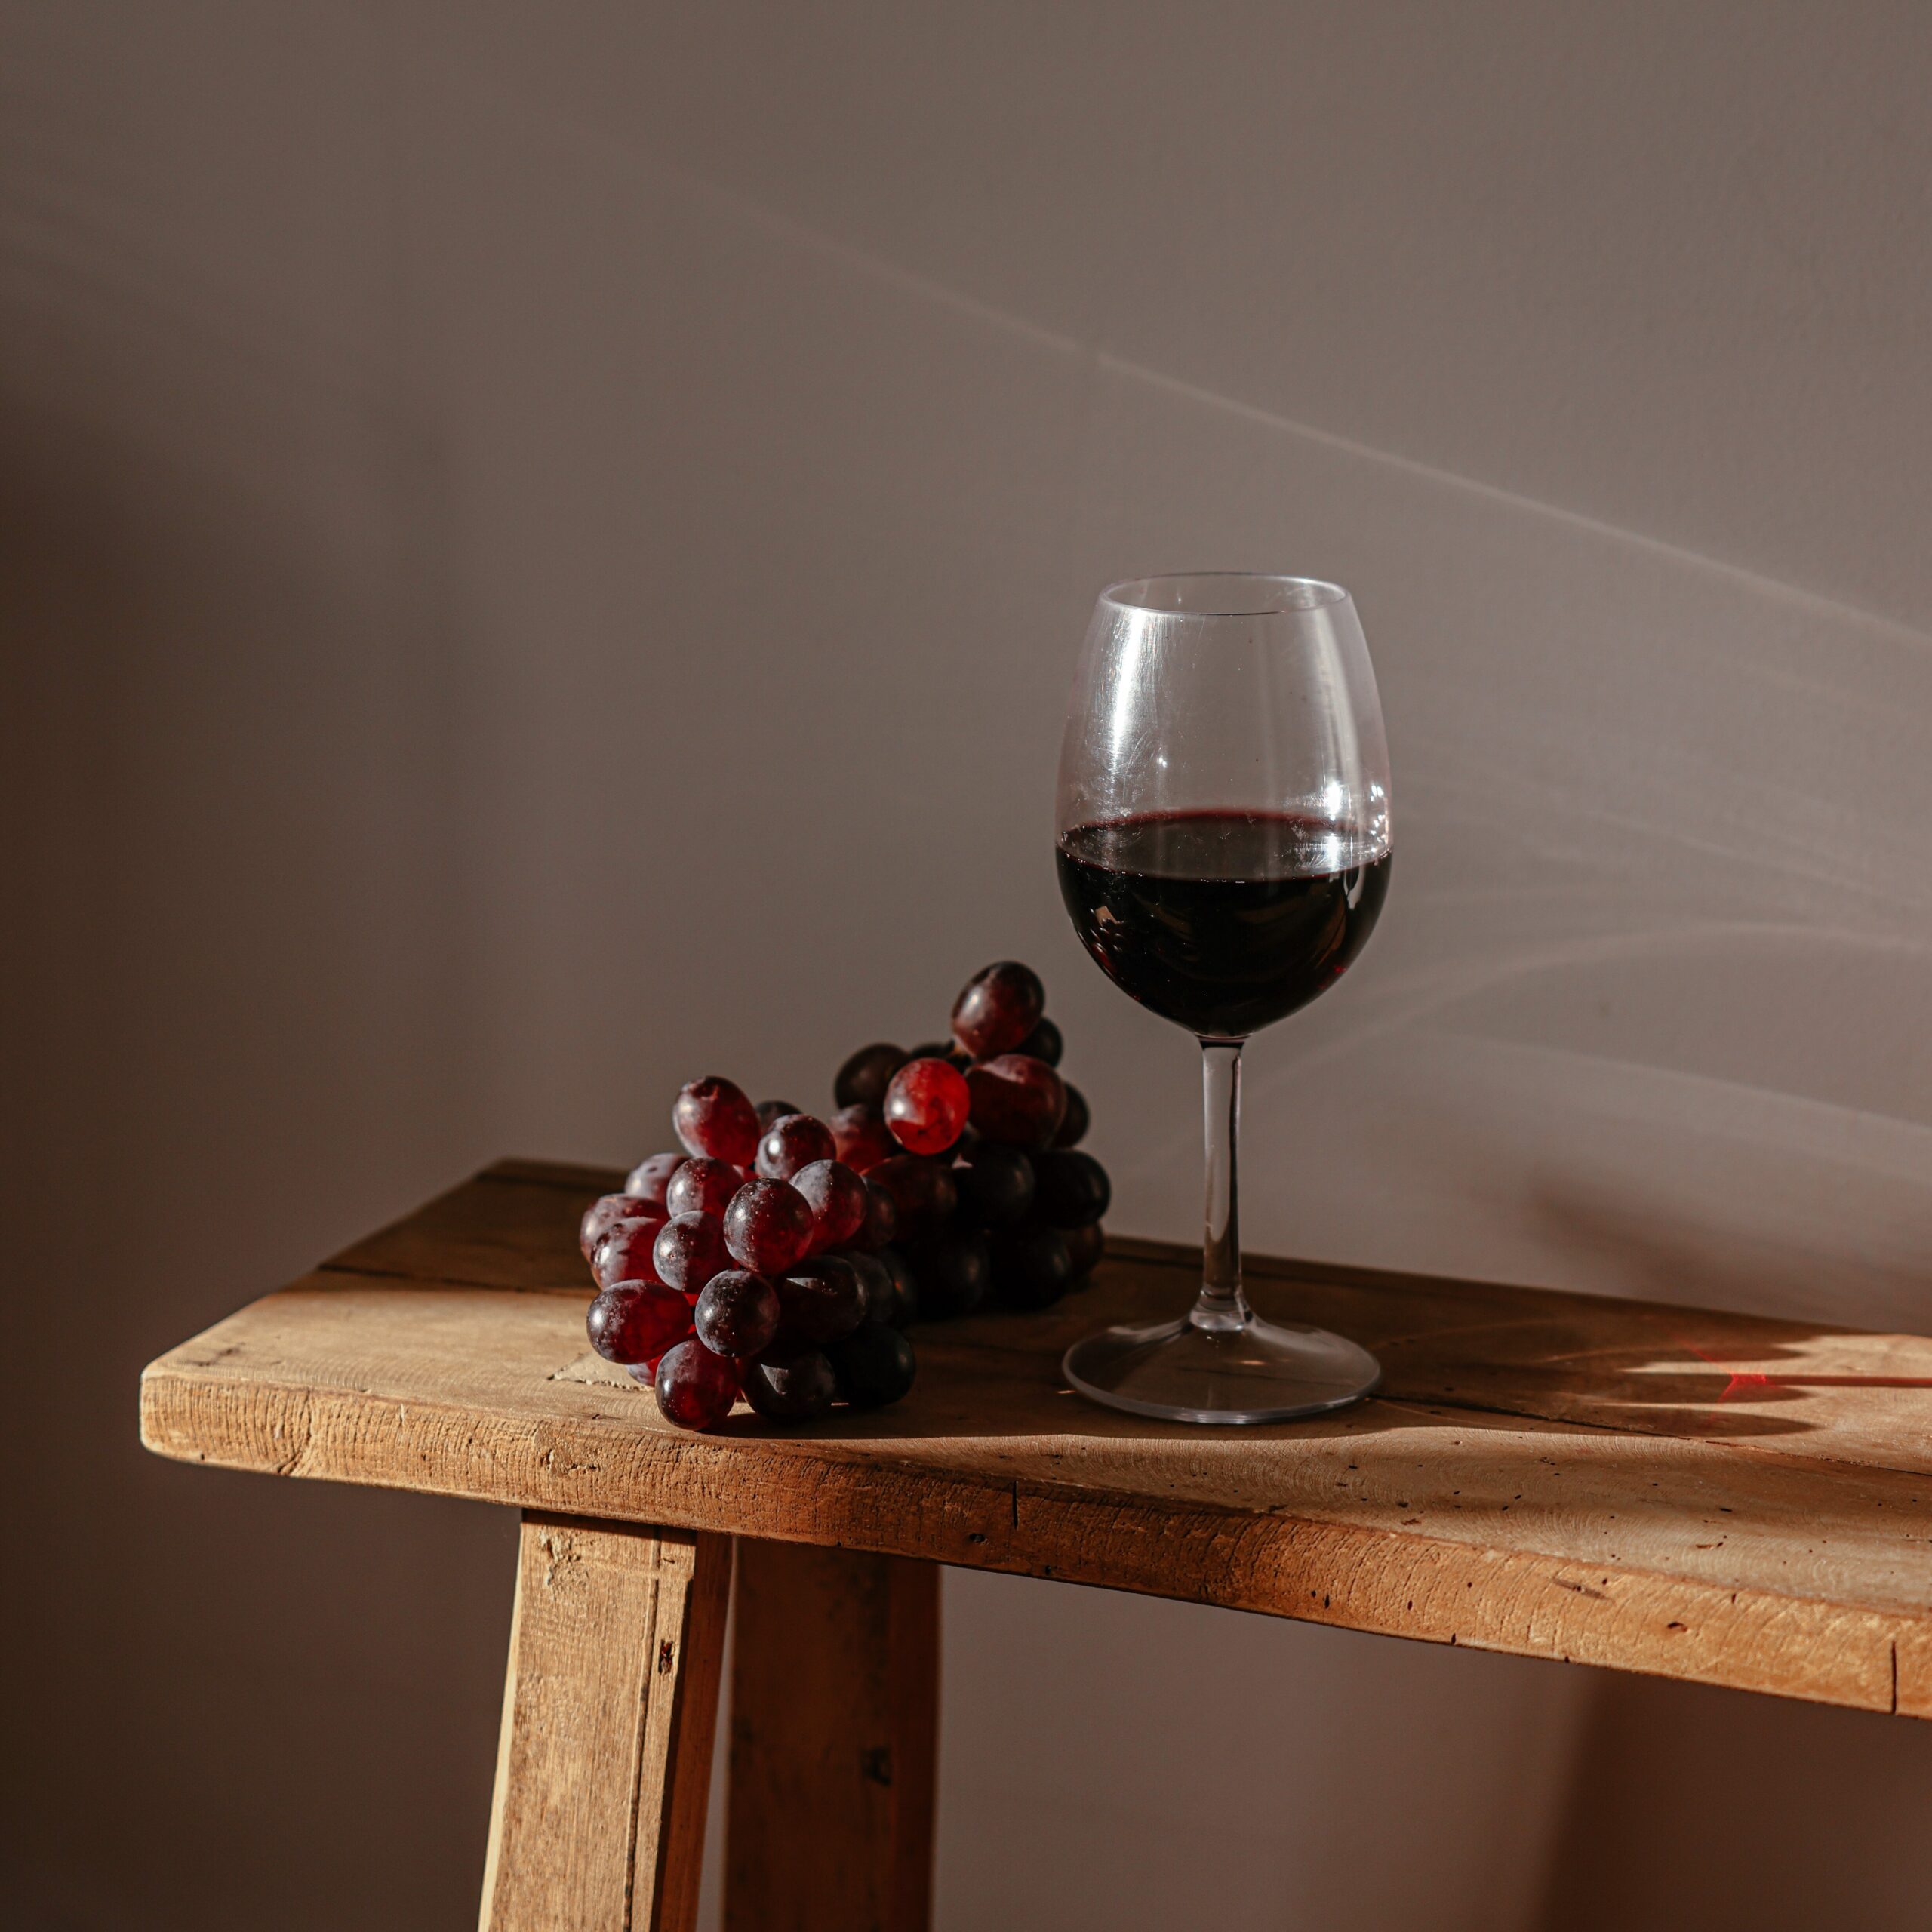 Glass of red wine next to grapes on a wooden bench.